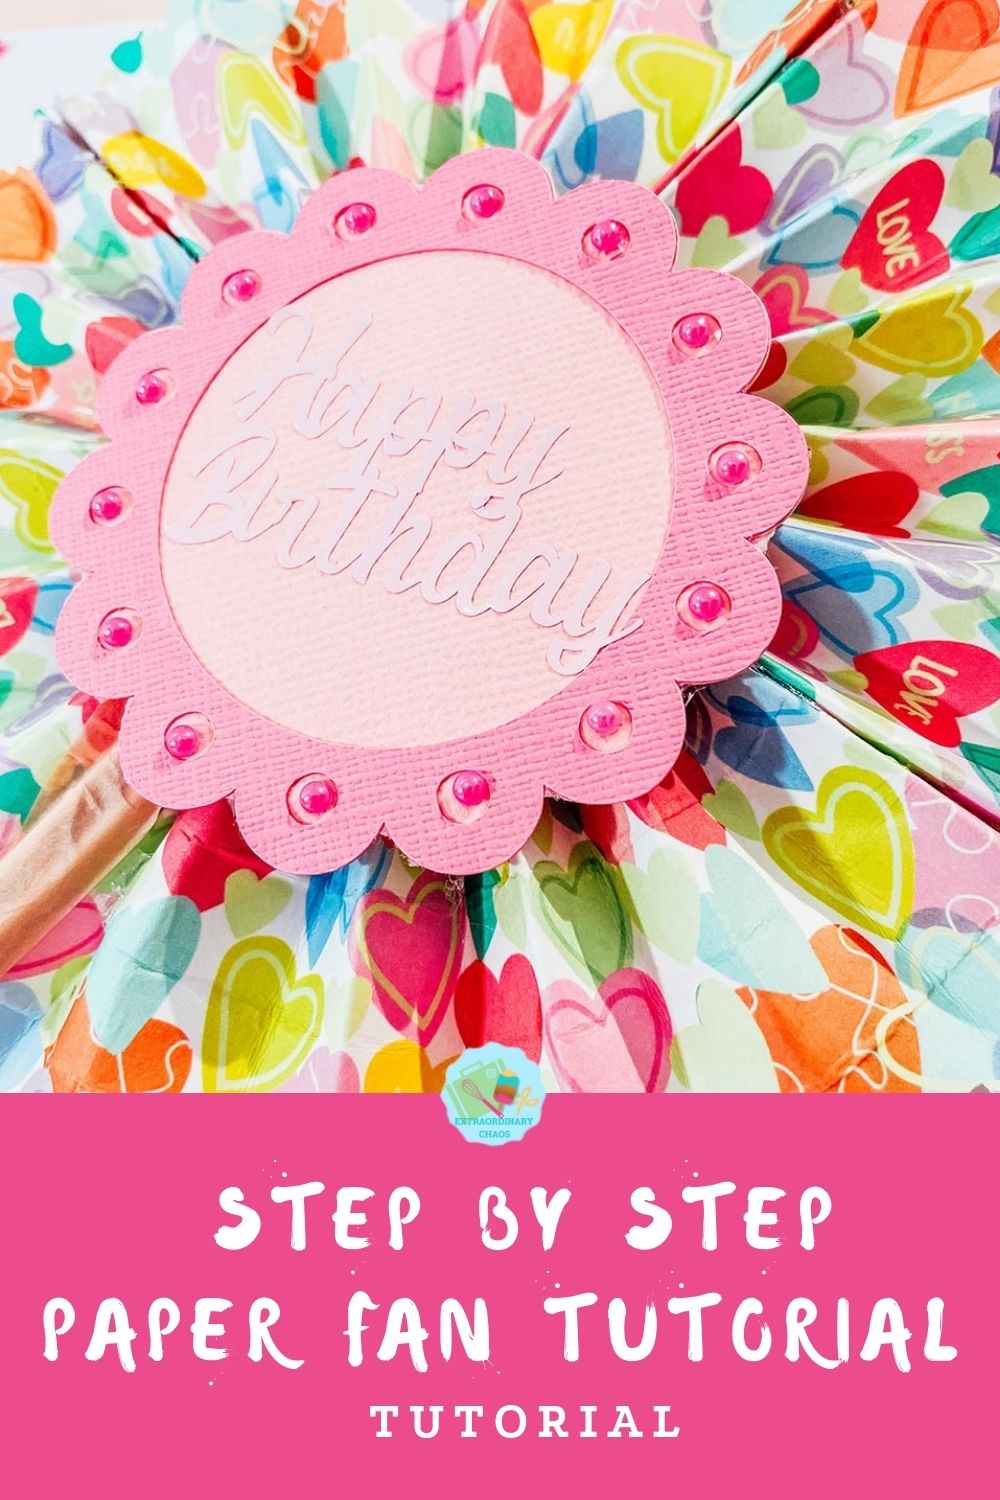 Step by step Paper fan card step by step tutorial